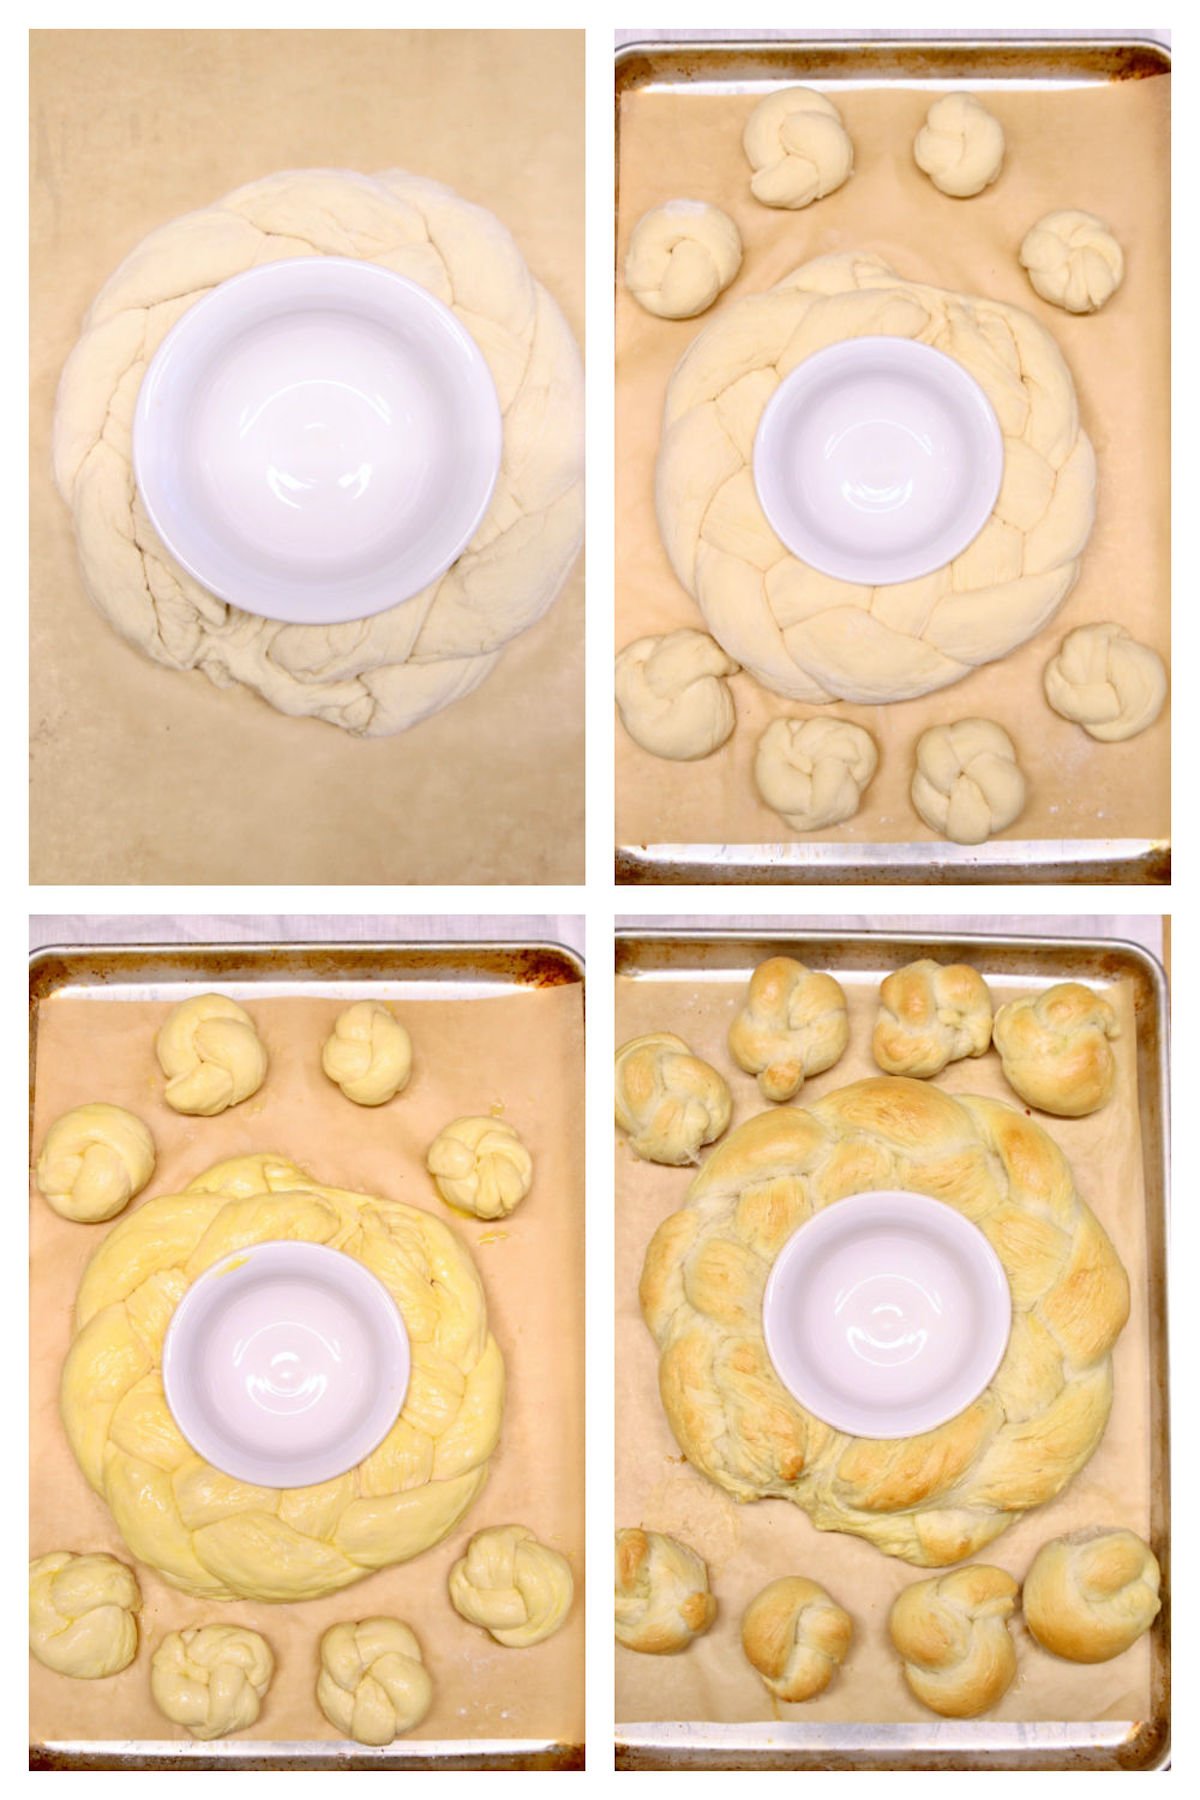 bread wreath dough ~ with bread knots - rising, bakingAdd 3 cups of flour and salt. Use a dough hook or wooden spoon to mix on low until ingredients come together.